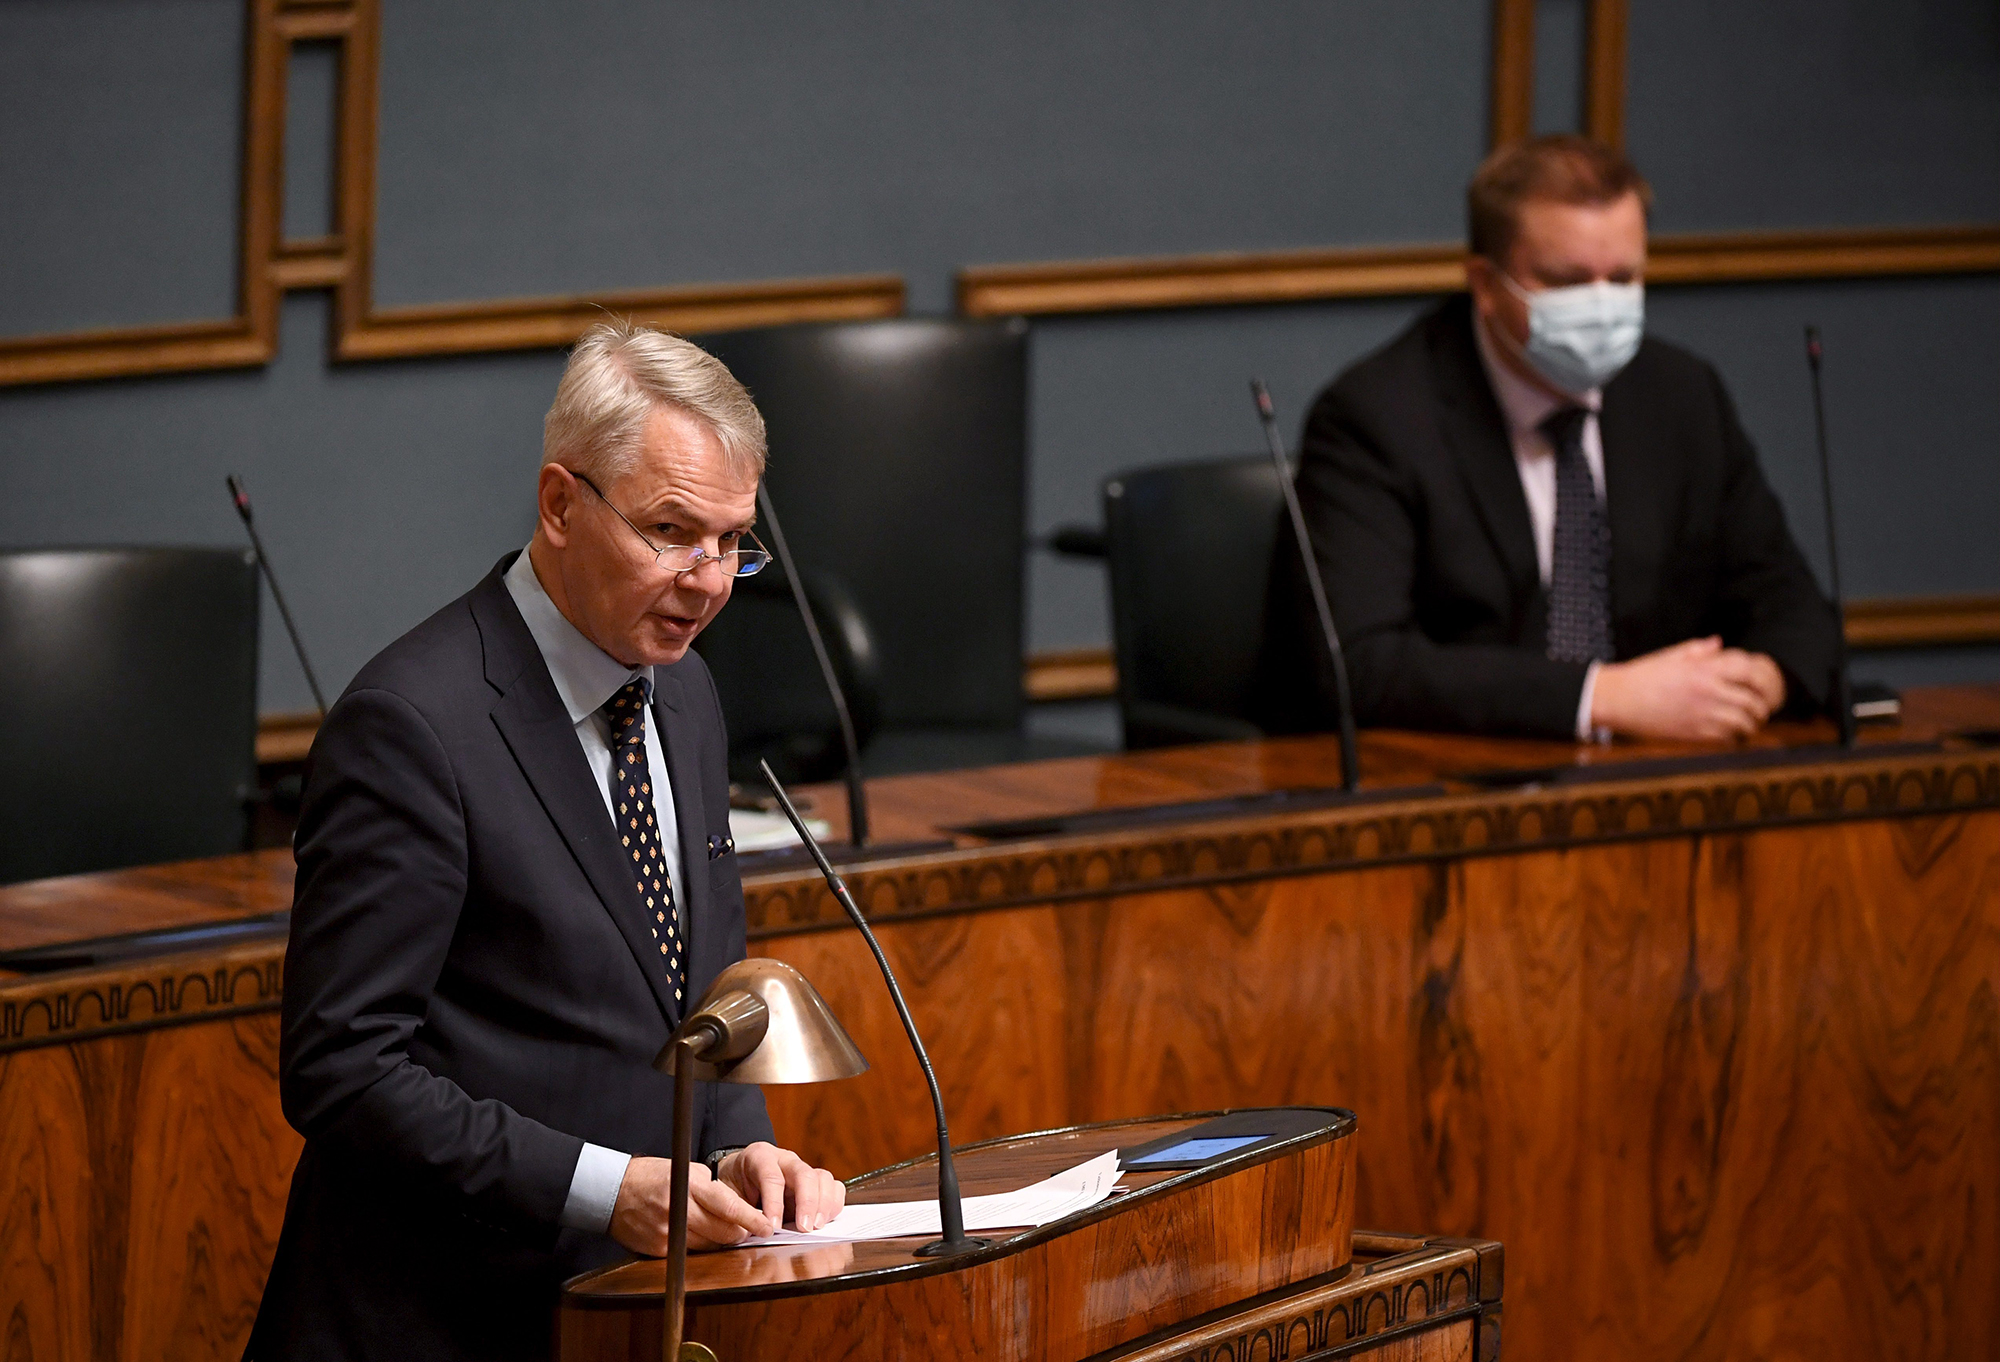 Yle sources: Committee rules Foreign Minister Haavisto broke the law, but he should not be blamed – Greens leave disagreement